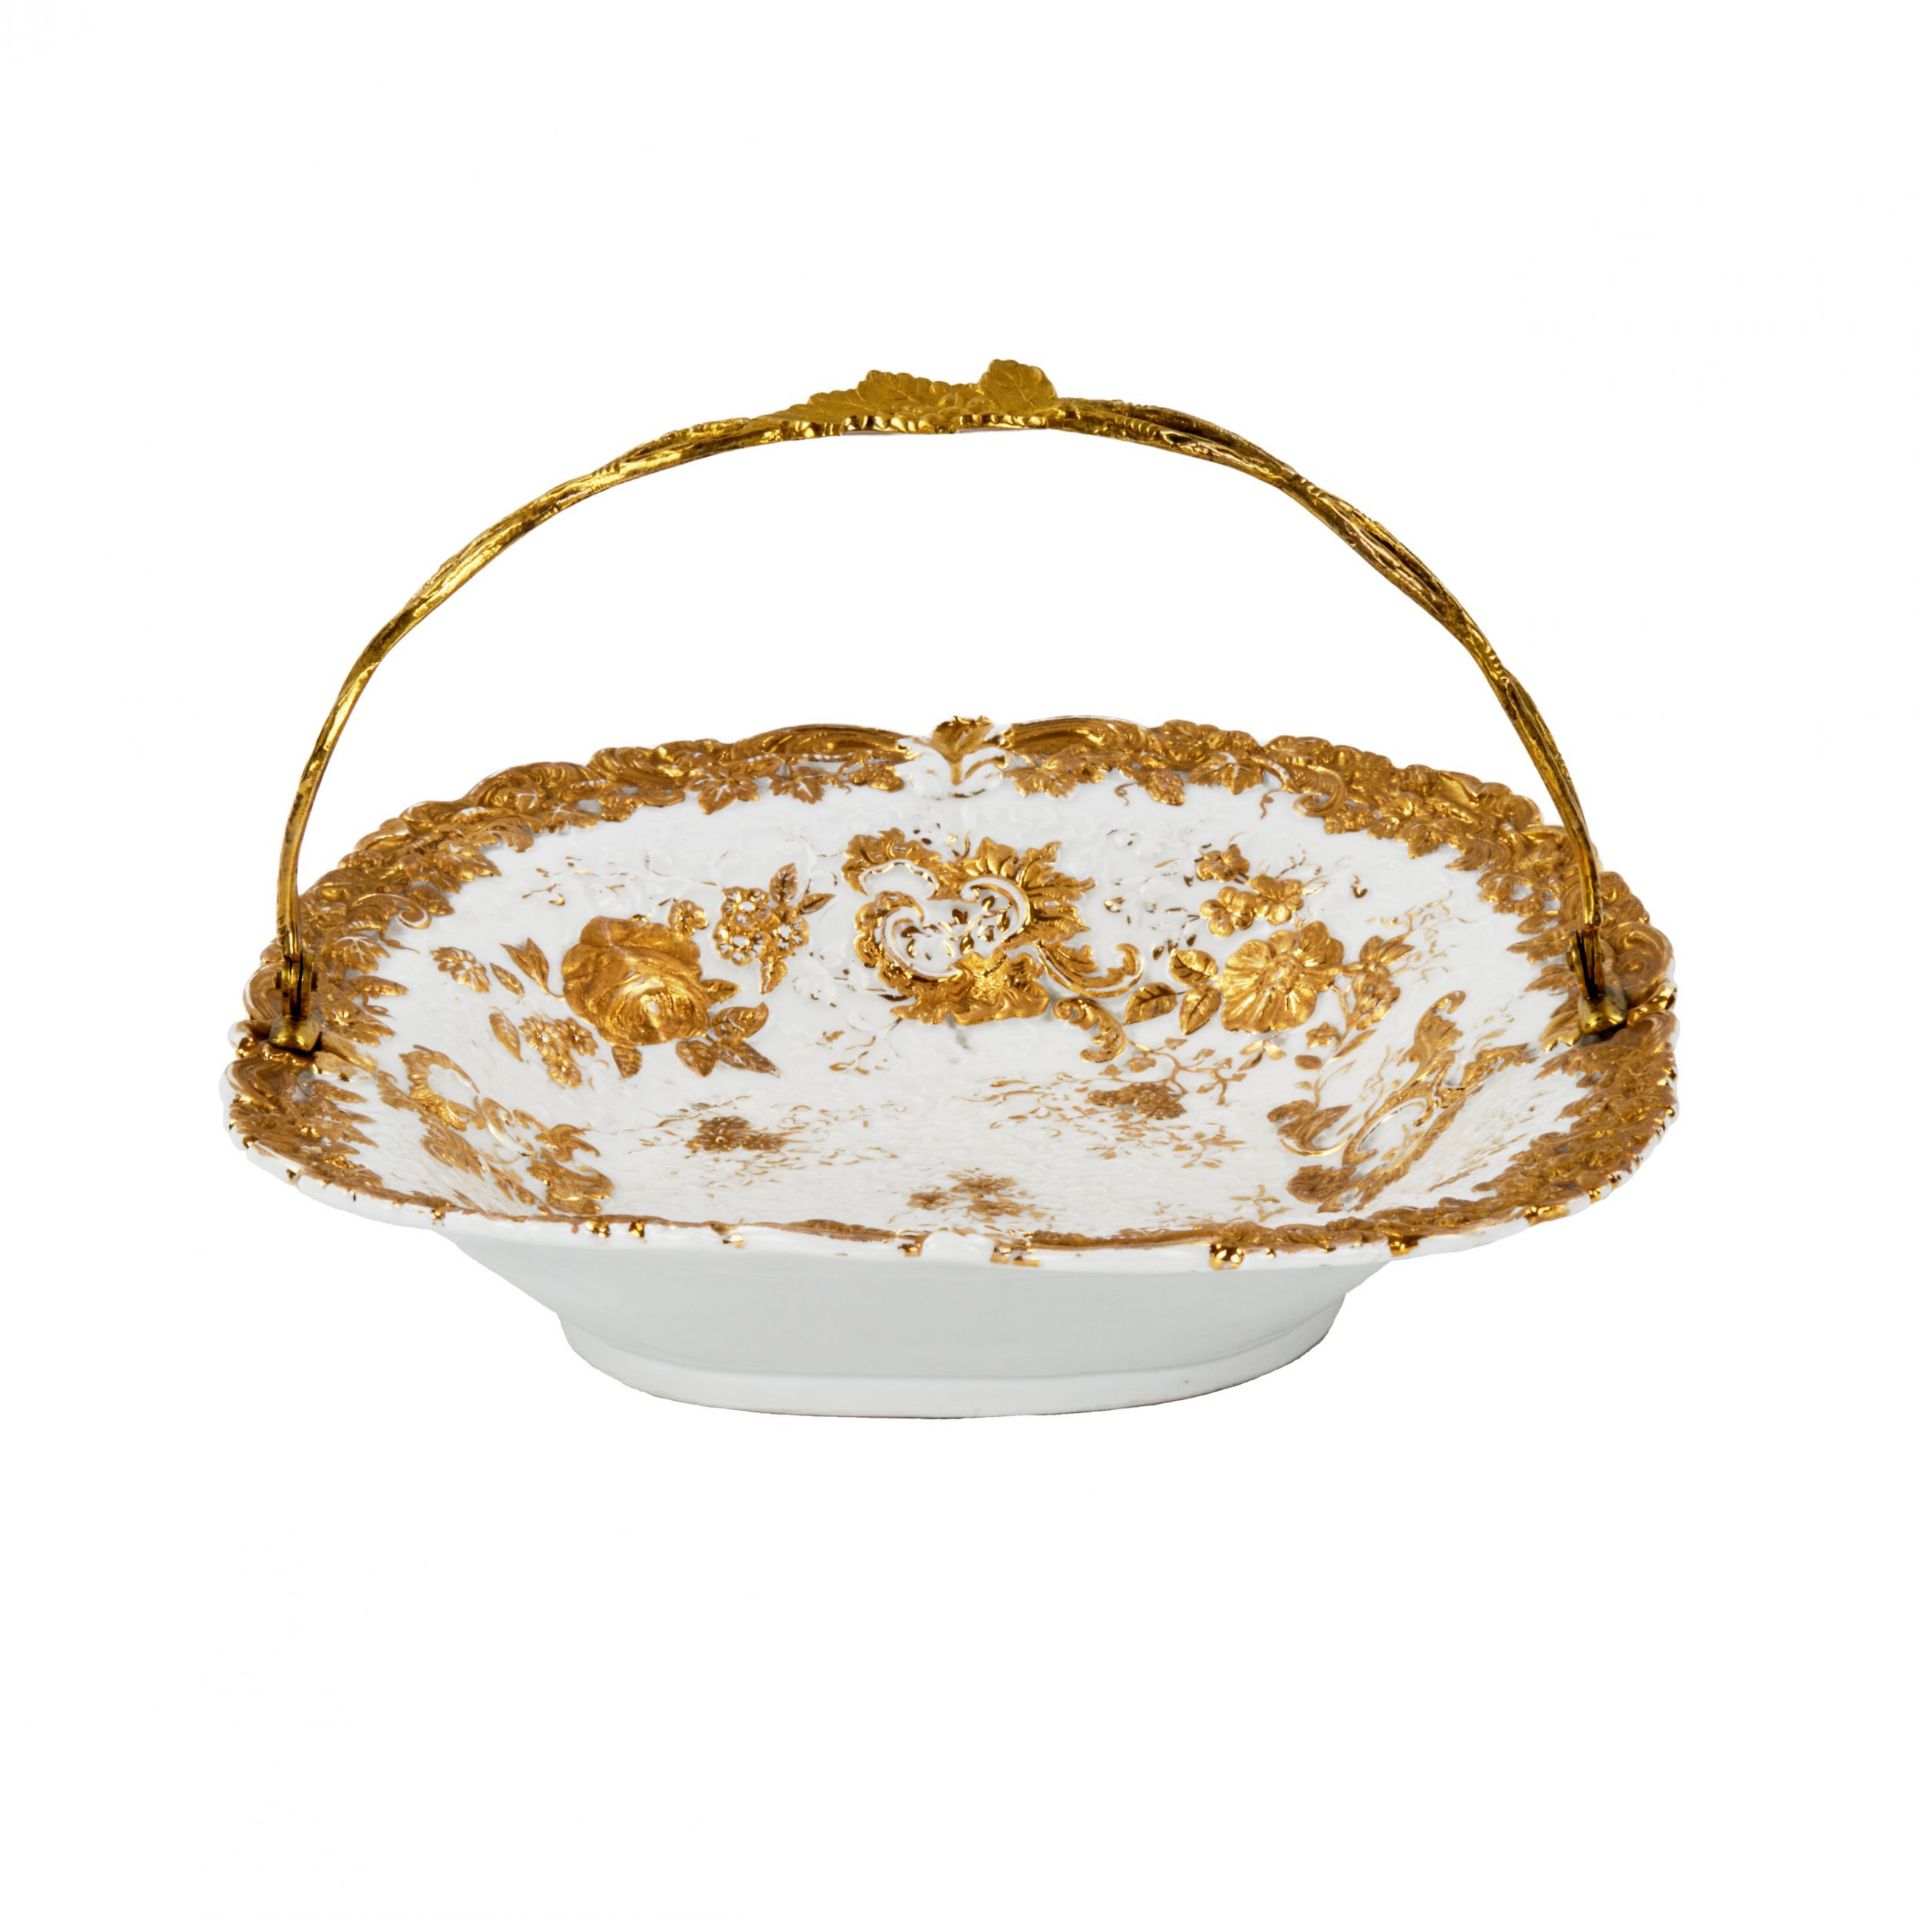 Meissen porcelain dish with metal handle. - Image 2 of 5